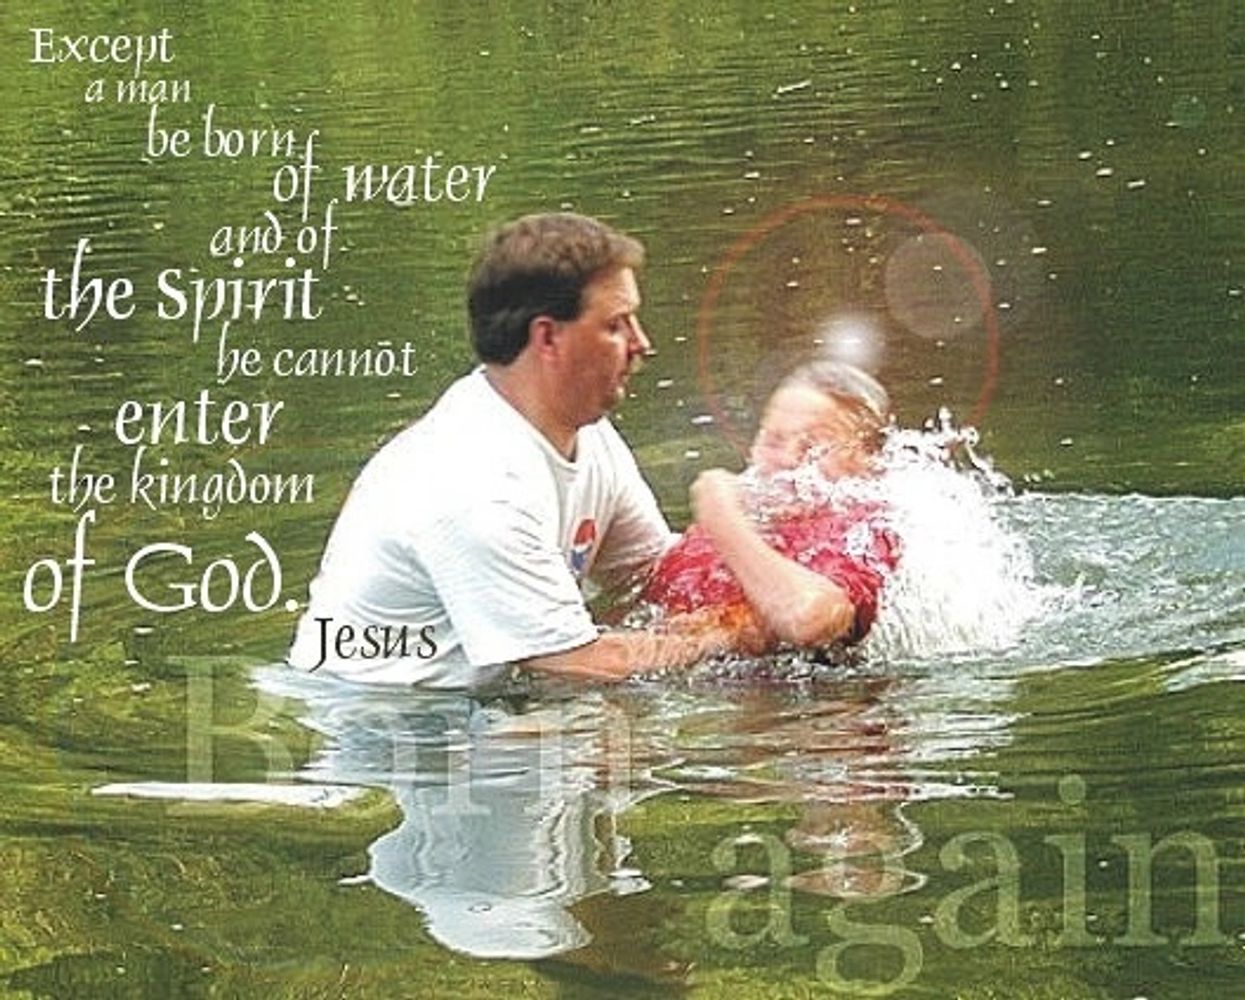 Being baptized for the forgiveness of sins